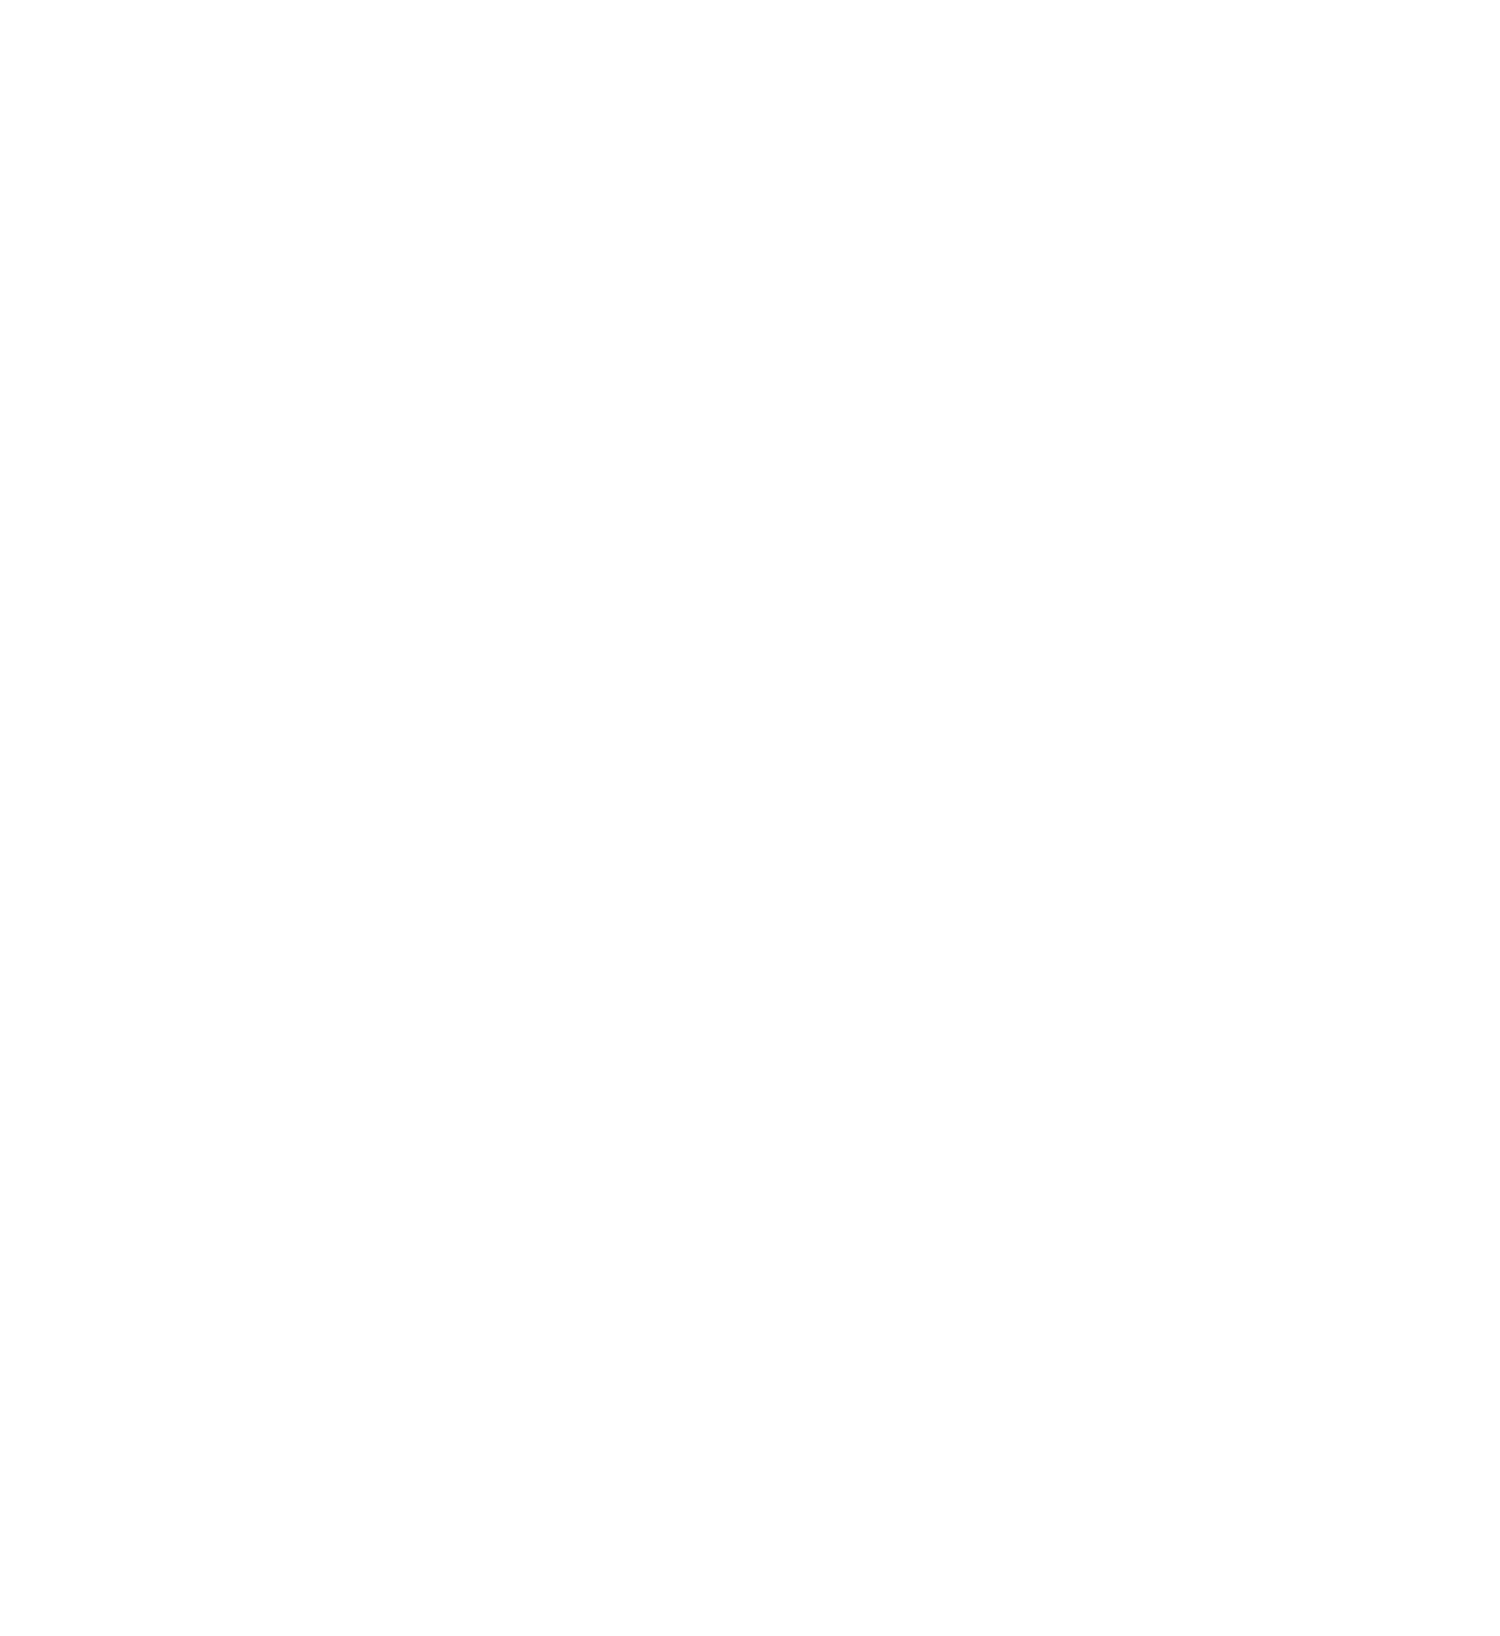 The Center for Living Water